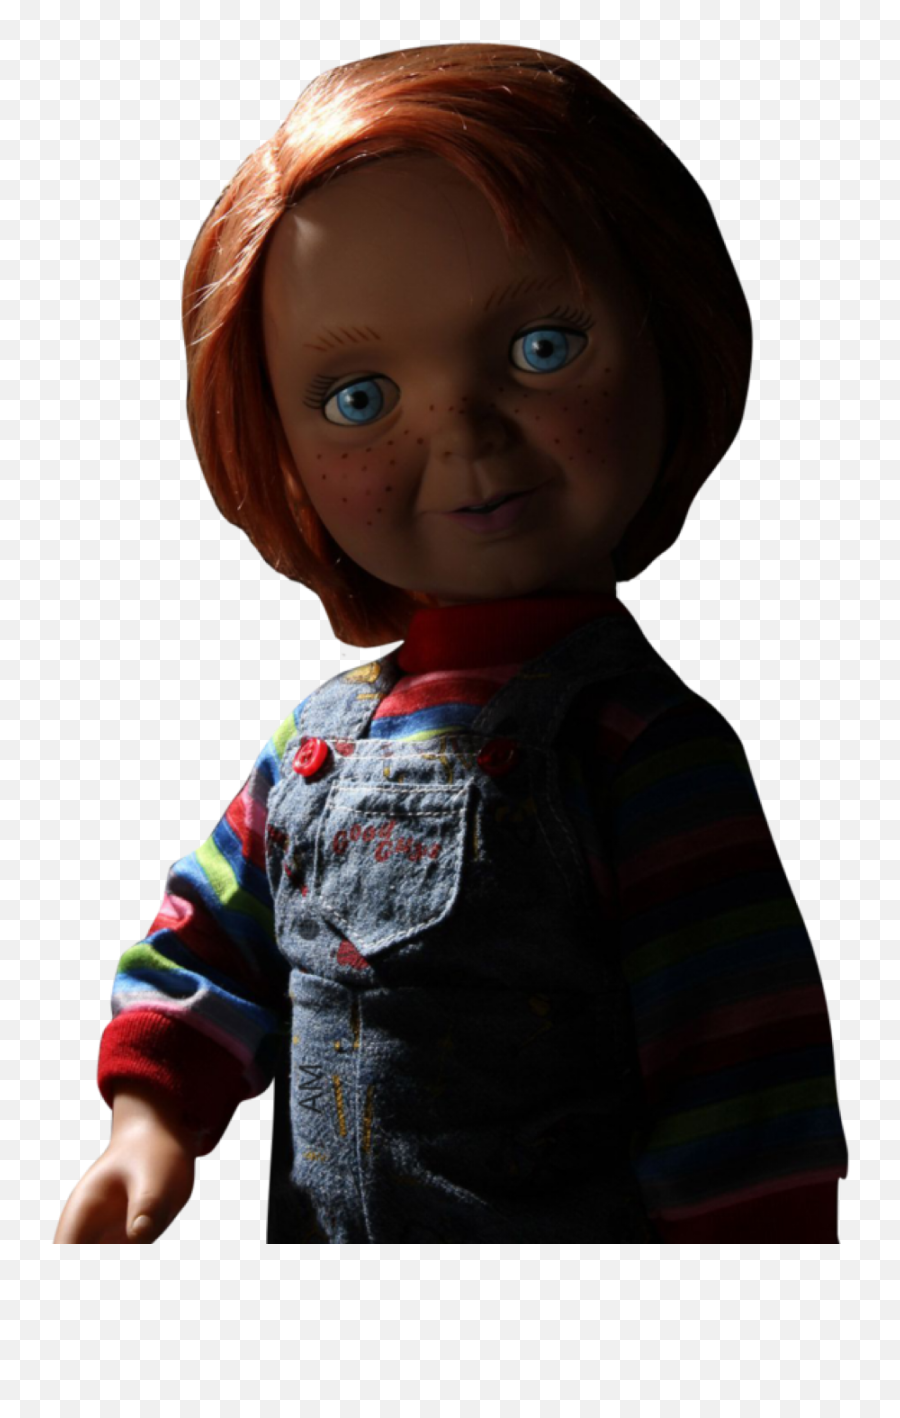 Chucky Doll Png - Chucky Toy Freetoedit Childs Play Chucky Doll Transparent,Chucky Png